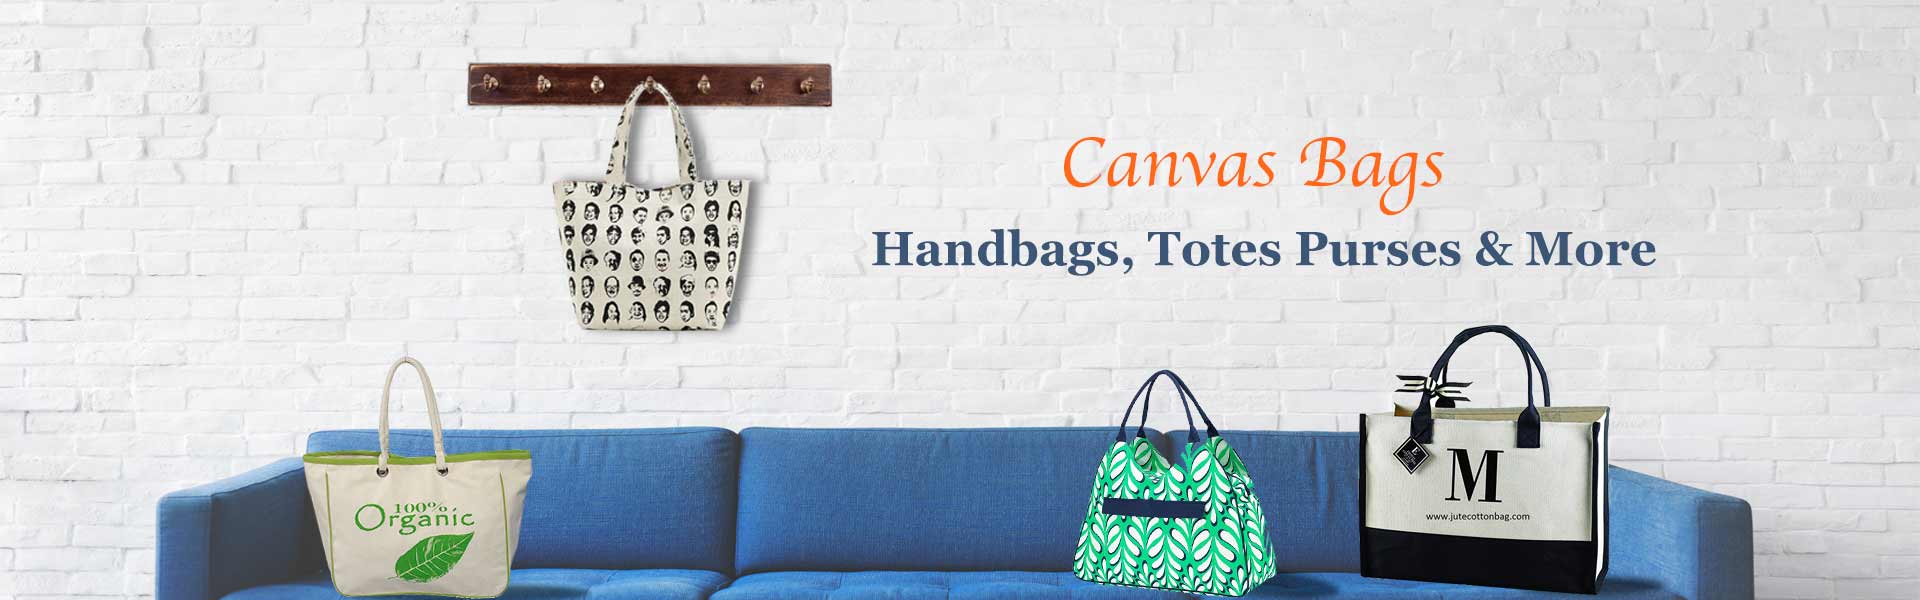 Wholesale Canvas Bags Supplier in Indianapolis